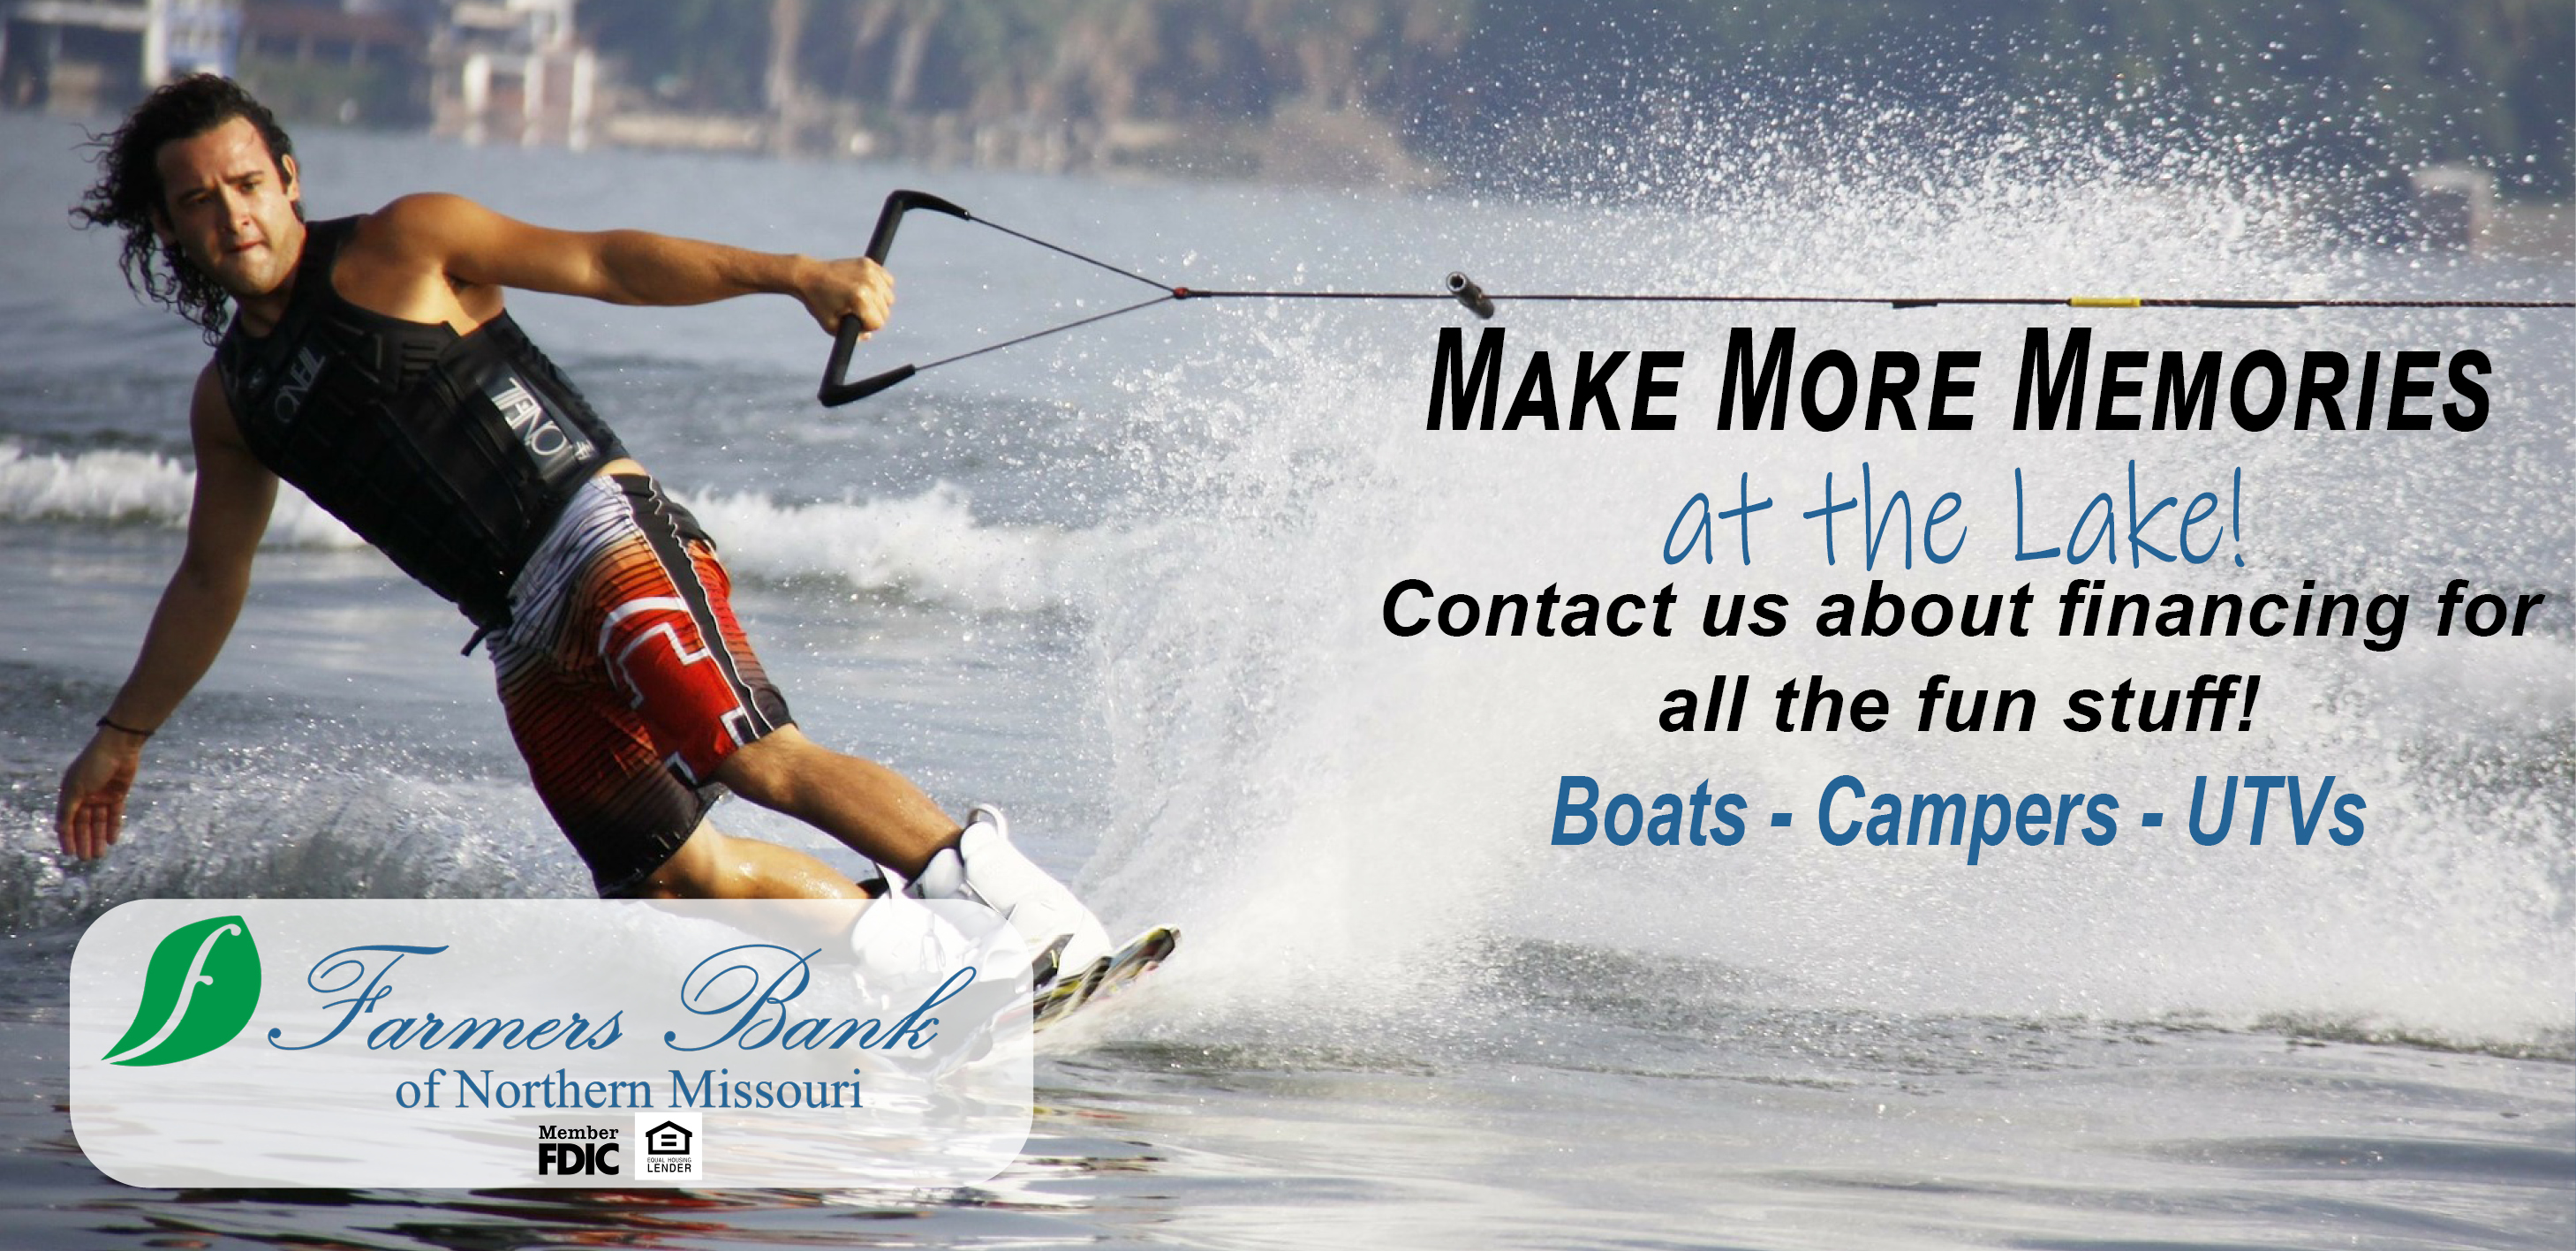 Make More Memories at the lake. Contact us about financing for all the fun stuff. Boats. Campers. UTVs. Farmers Bank of Northern Missouri, Member FDIC, Equal Housing Lender